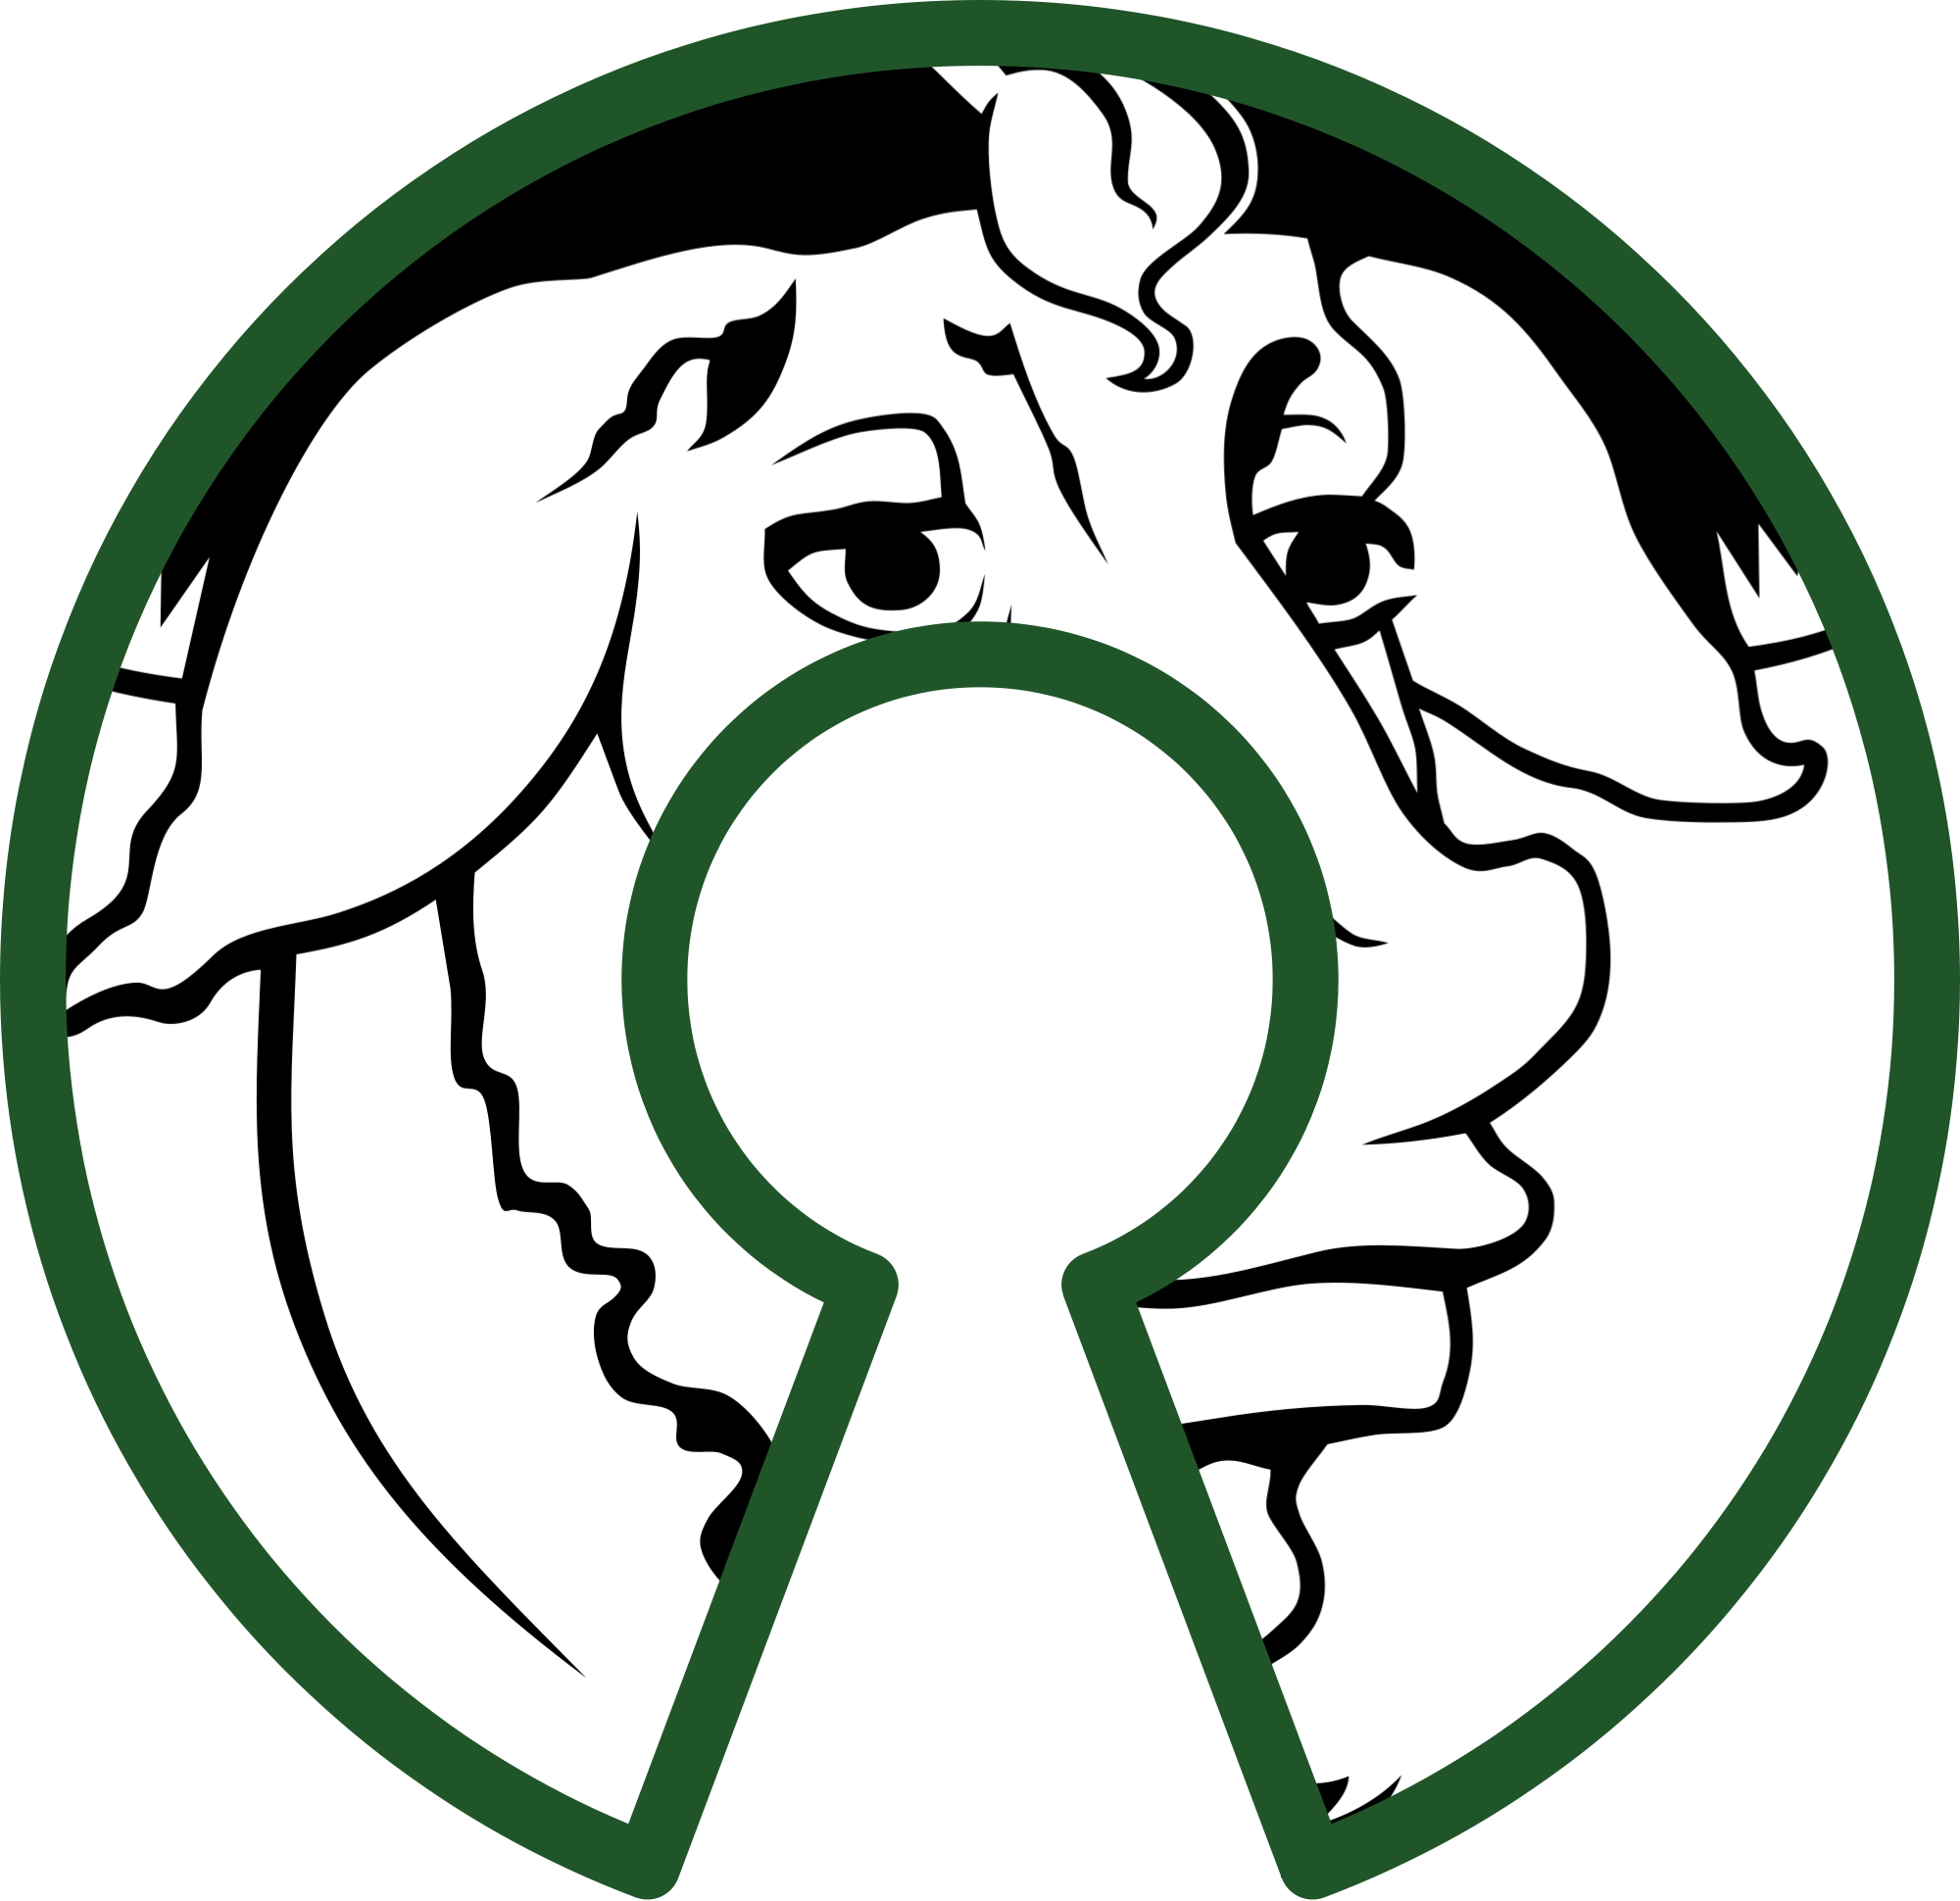 Free Software And Open Source Software Composite Logo - Gnu General Public License (2000x1940)